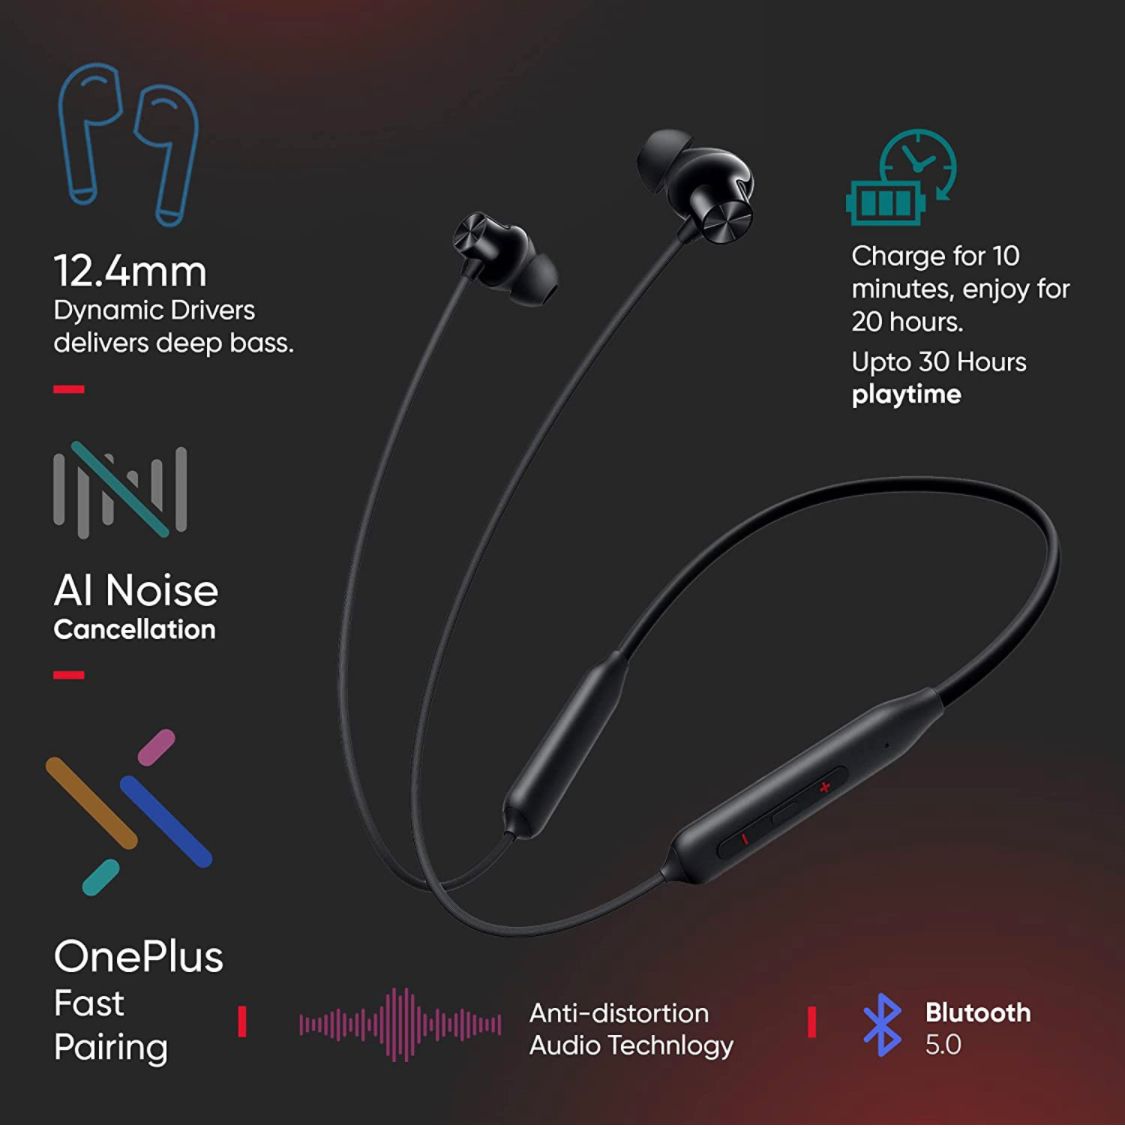 OnePlus Bullets Z2 Bluetooth Wireless in Ear Earphones with Mic, Bombastic Bass, 10 Mins Charge - 20 Hrs Music, 30 Hrs Battery Life.